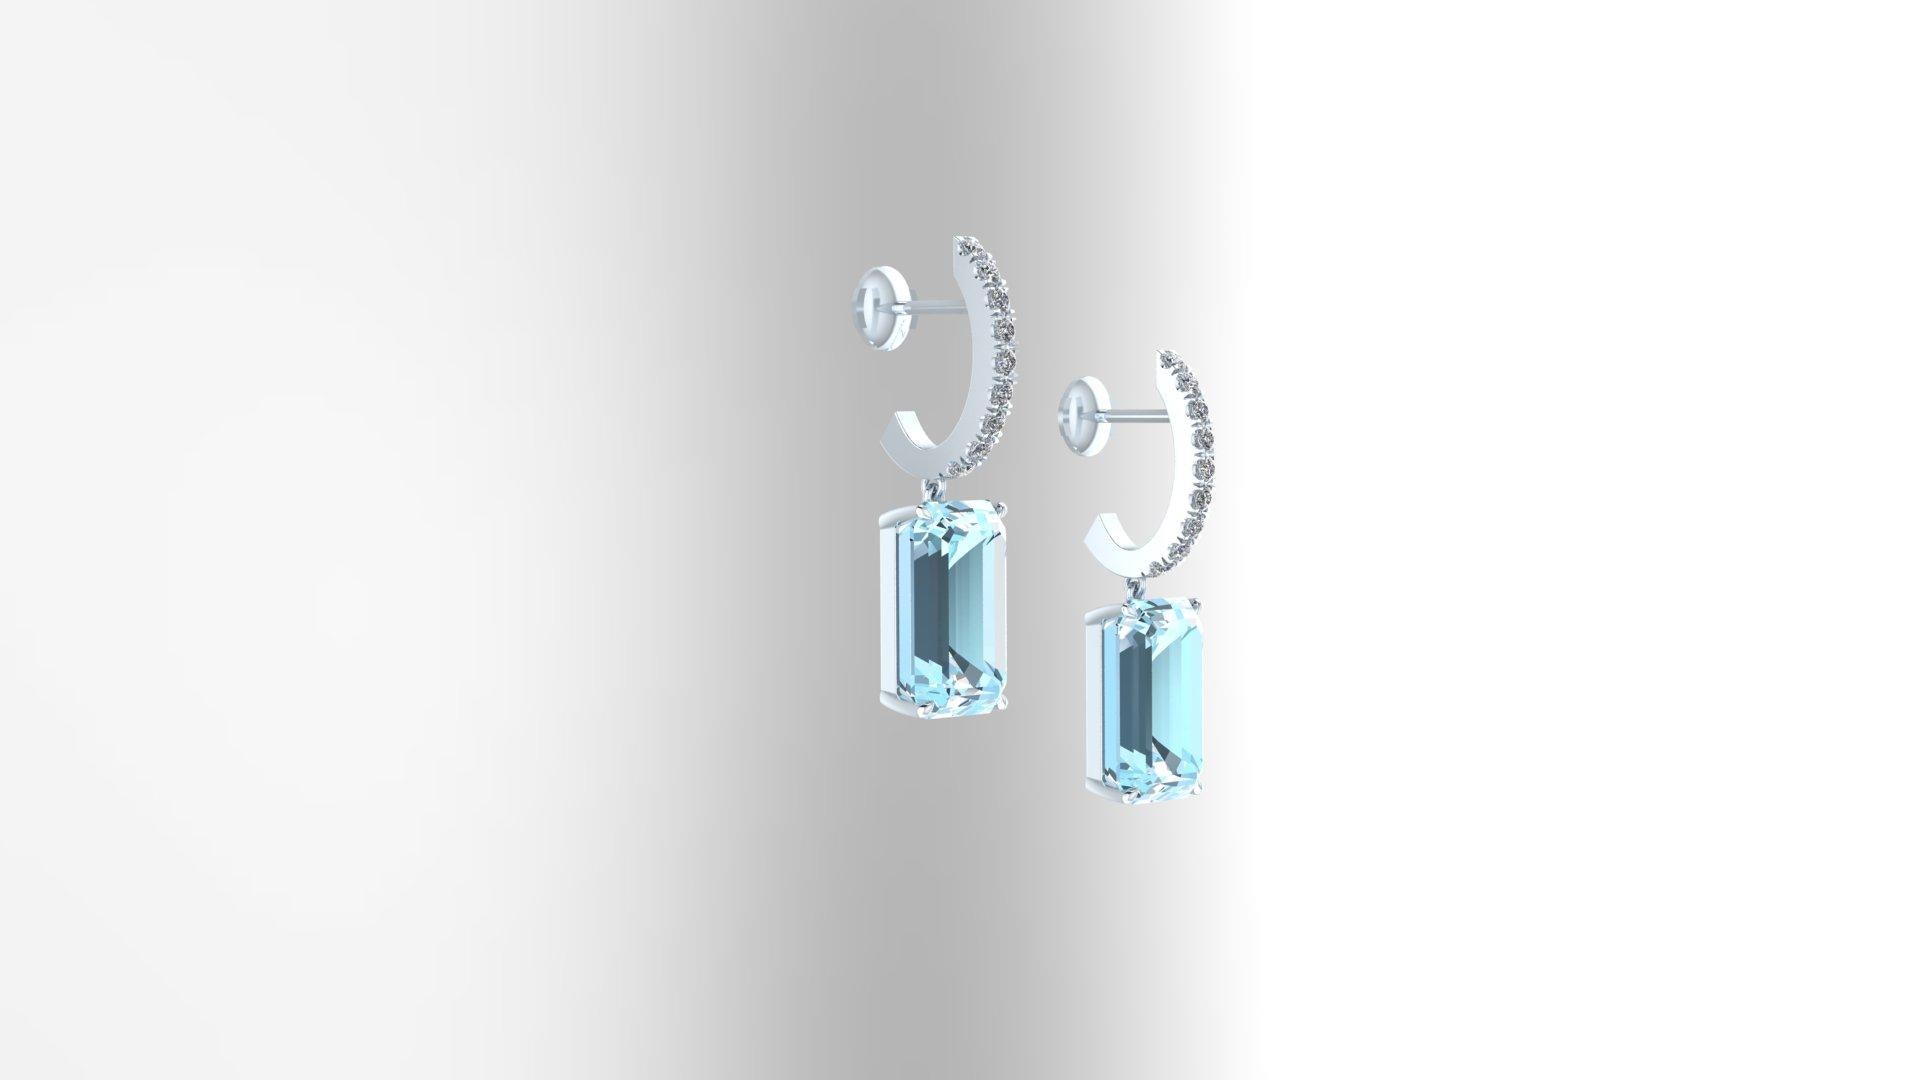 7.26 Carats Emerald cut Aquamarine and Diamonds Platinum Earrings, diamonds brilliant cut for an approximate total carat weight of 0.28ct of G color, VS clarity, set in Platinum 950 drop dangling earrings
Push back self locking.   Complimentary